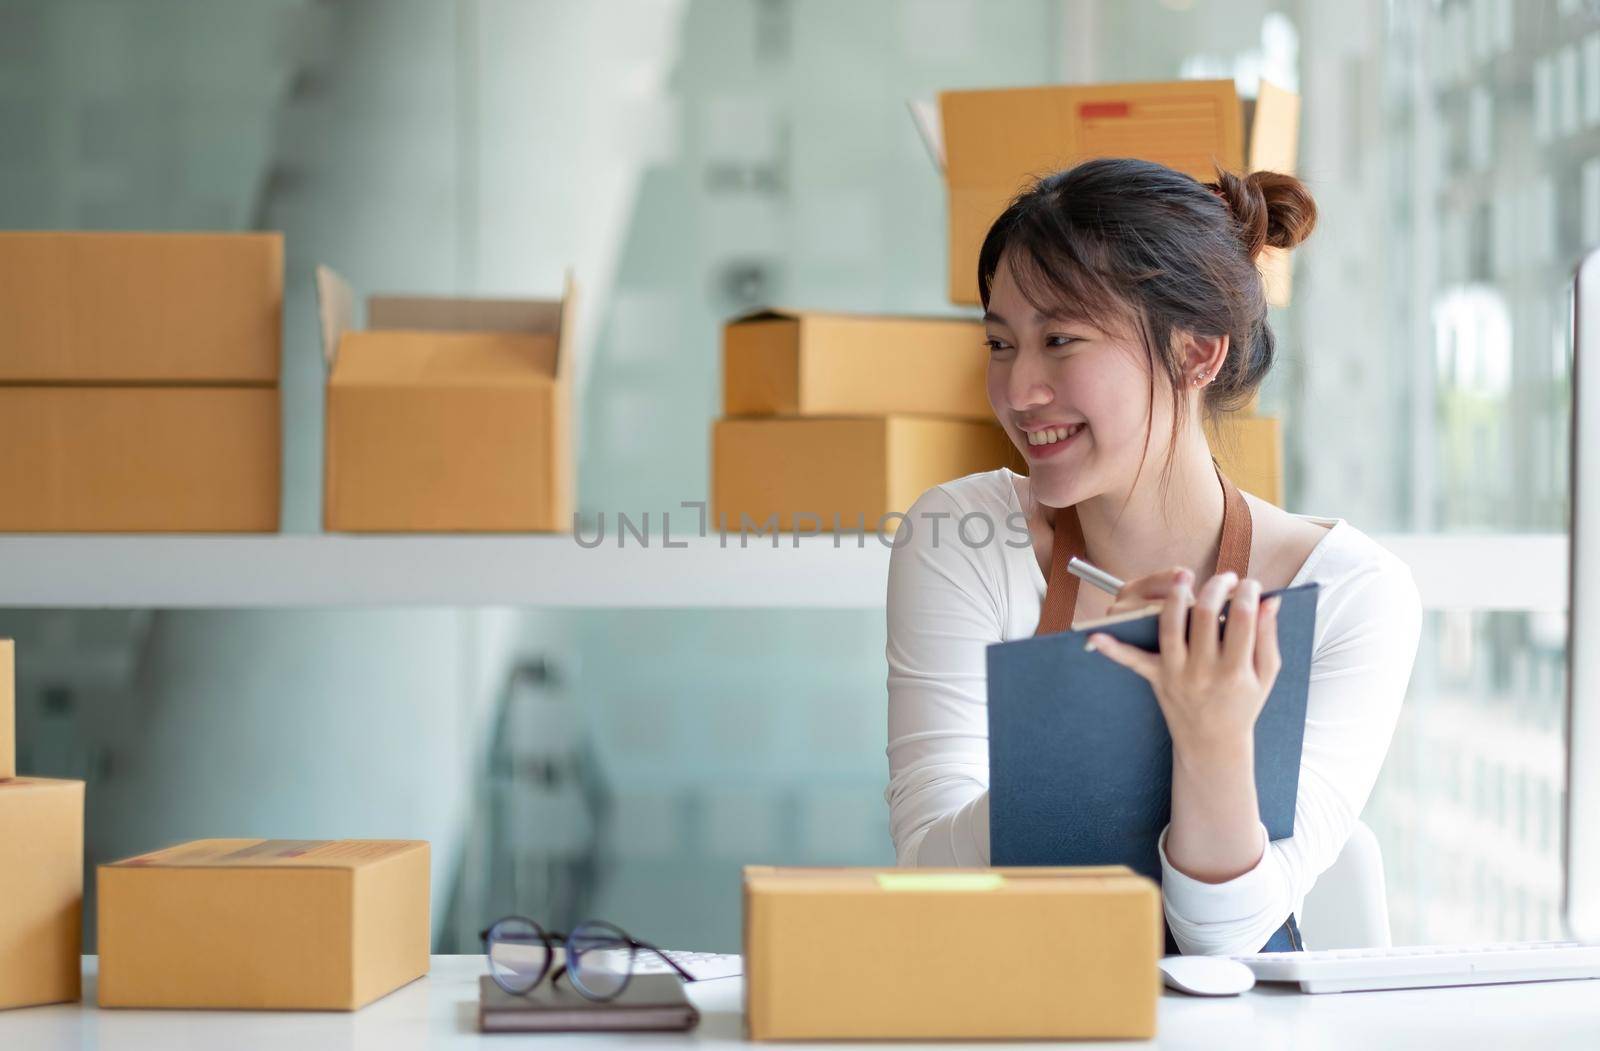 Starting small businesses SME owners female entrepreneurs Use a laptop or notebook to receive and review orders online to prepare to pack boxes, sell to customers, SME online business ideas..